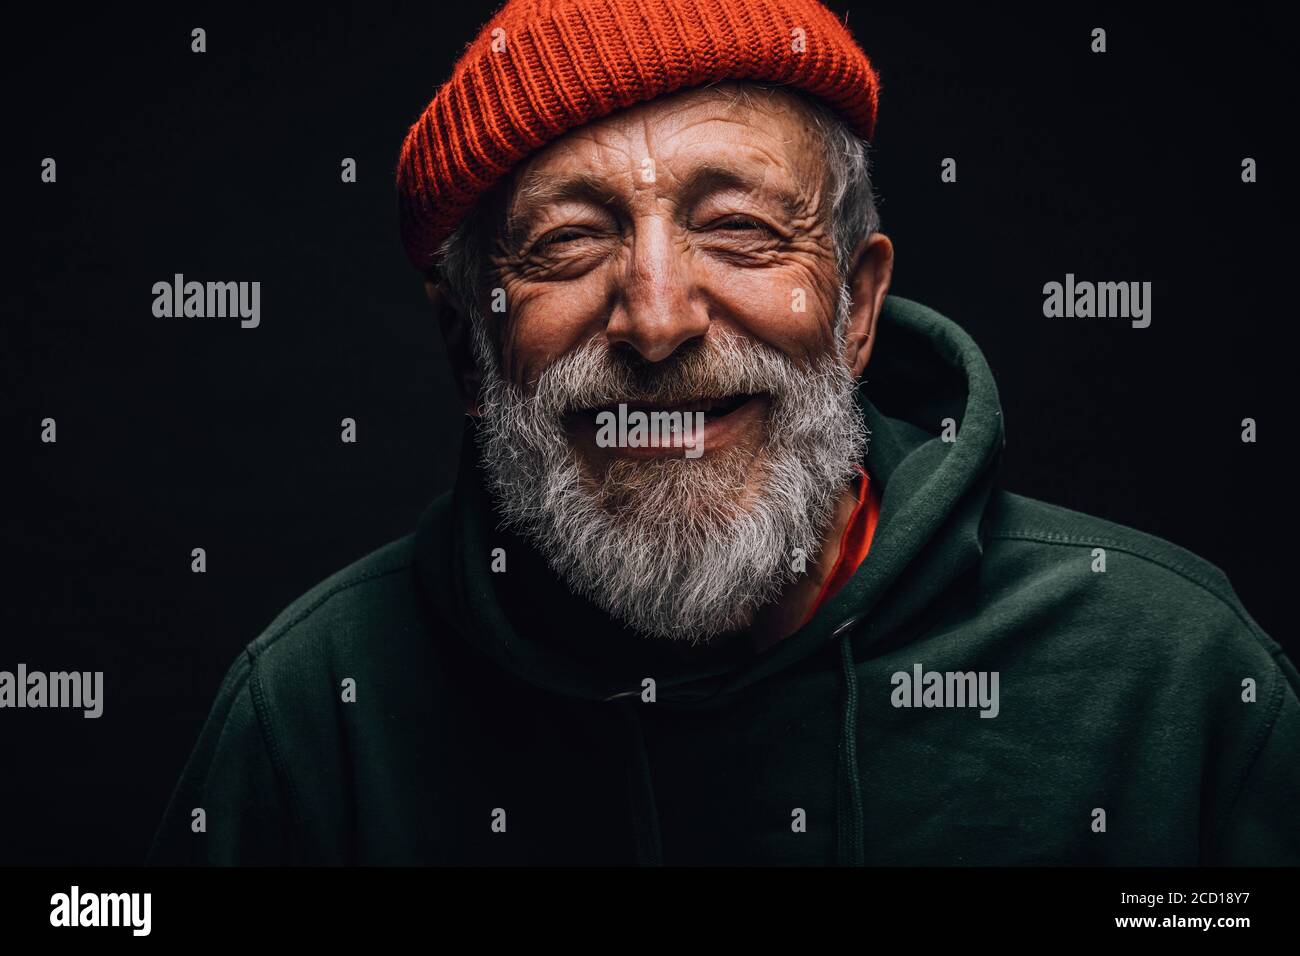 Close up portrait of happy 70-year-old optimist man with smiling wrinkled face, dressed in hipster orange hat and green hoodie, isolated over black ba Stock Photo